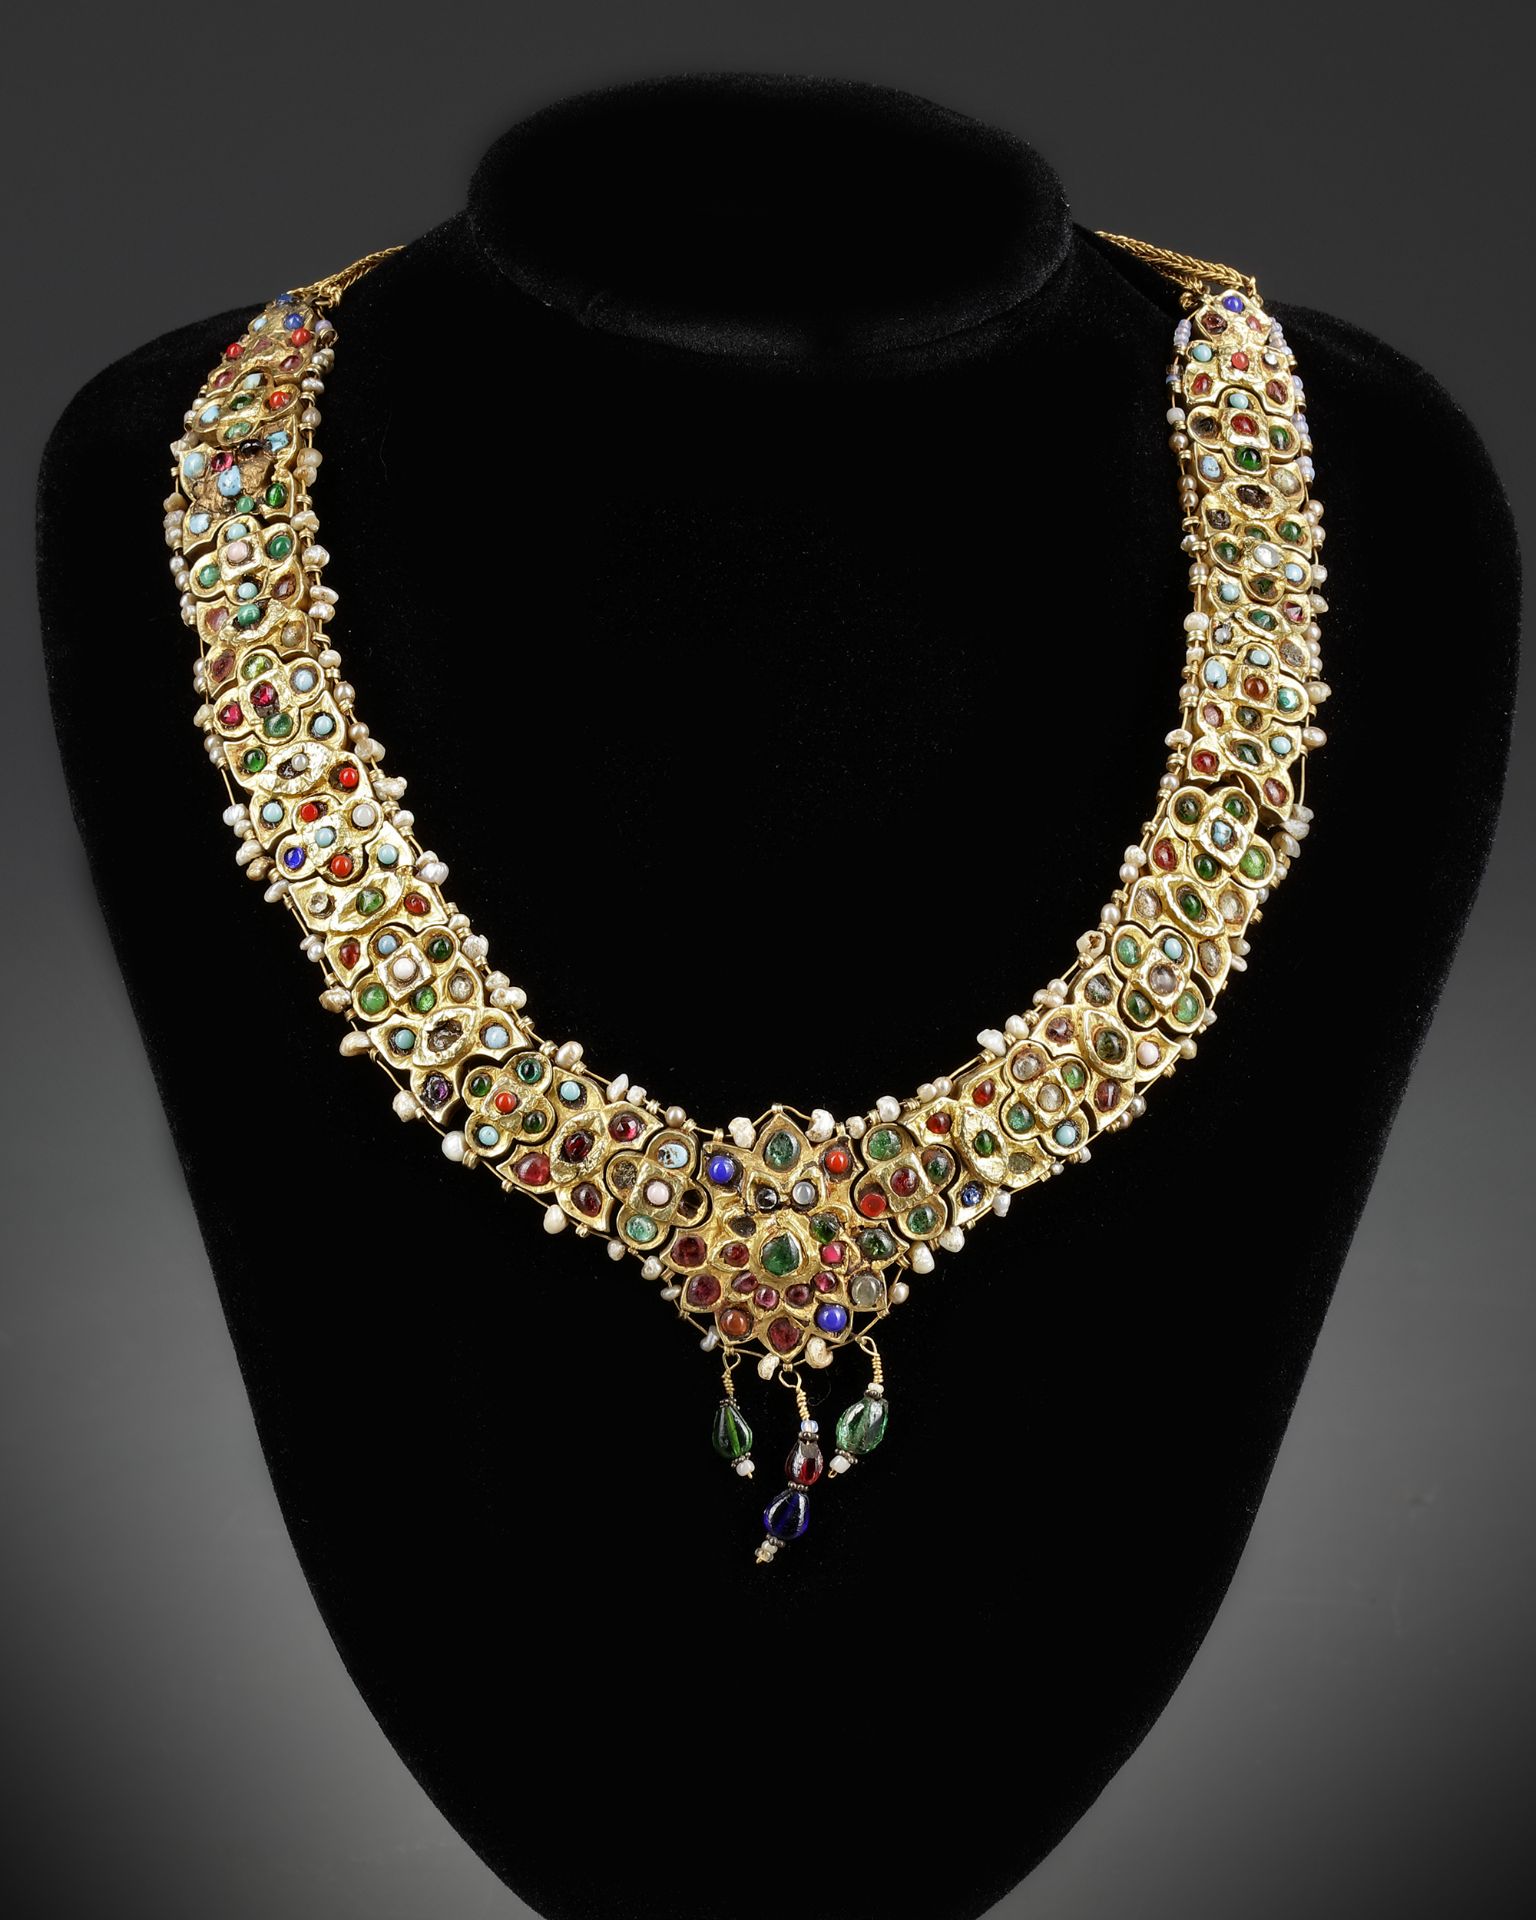 A MUGHAL GEM-SET ENAMELED GOLD NECKLACE, LATE 18TH CENTURY - Image 7 of 8